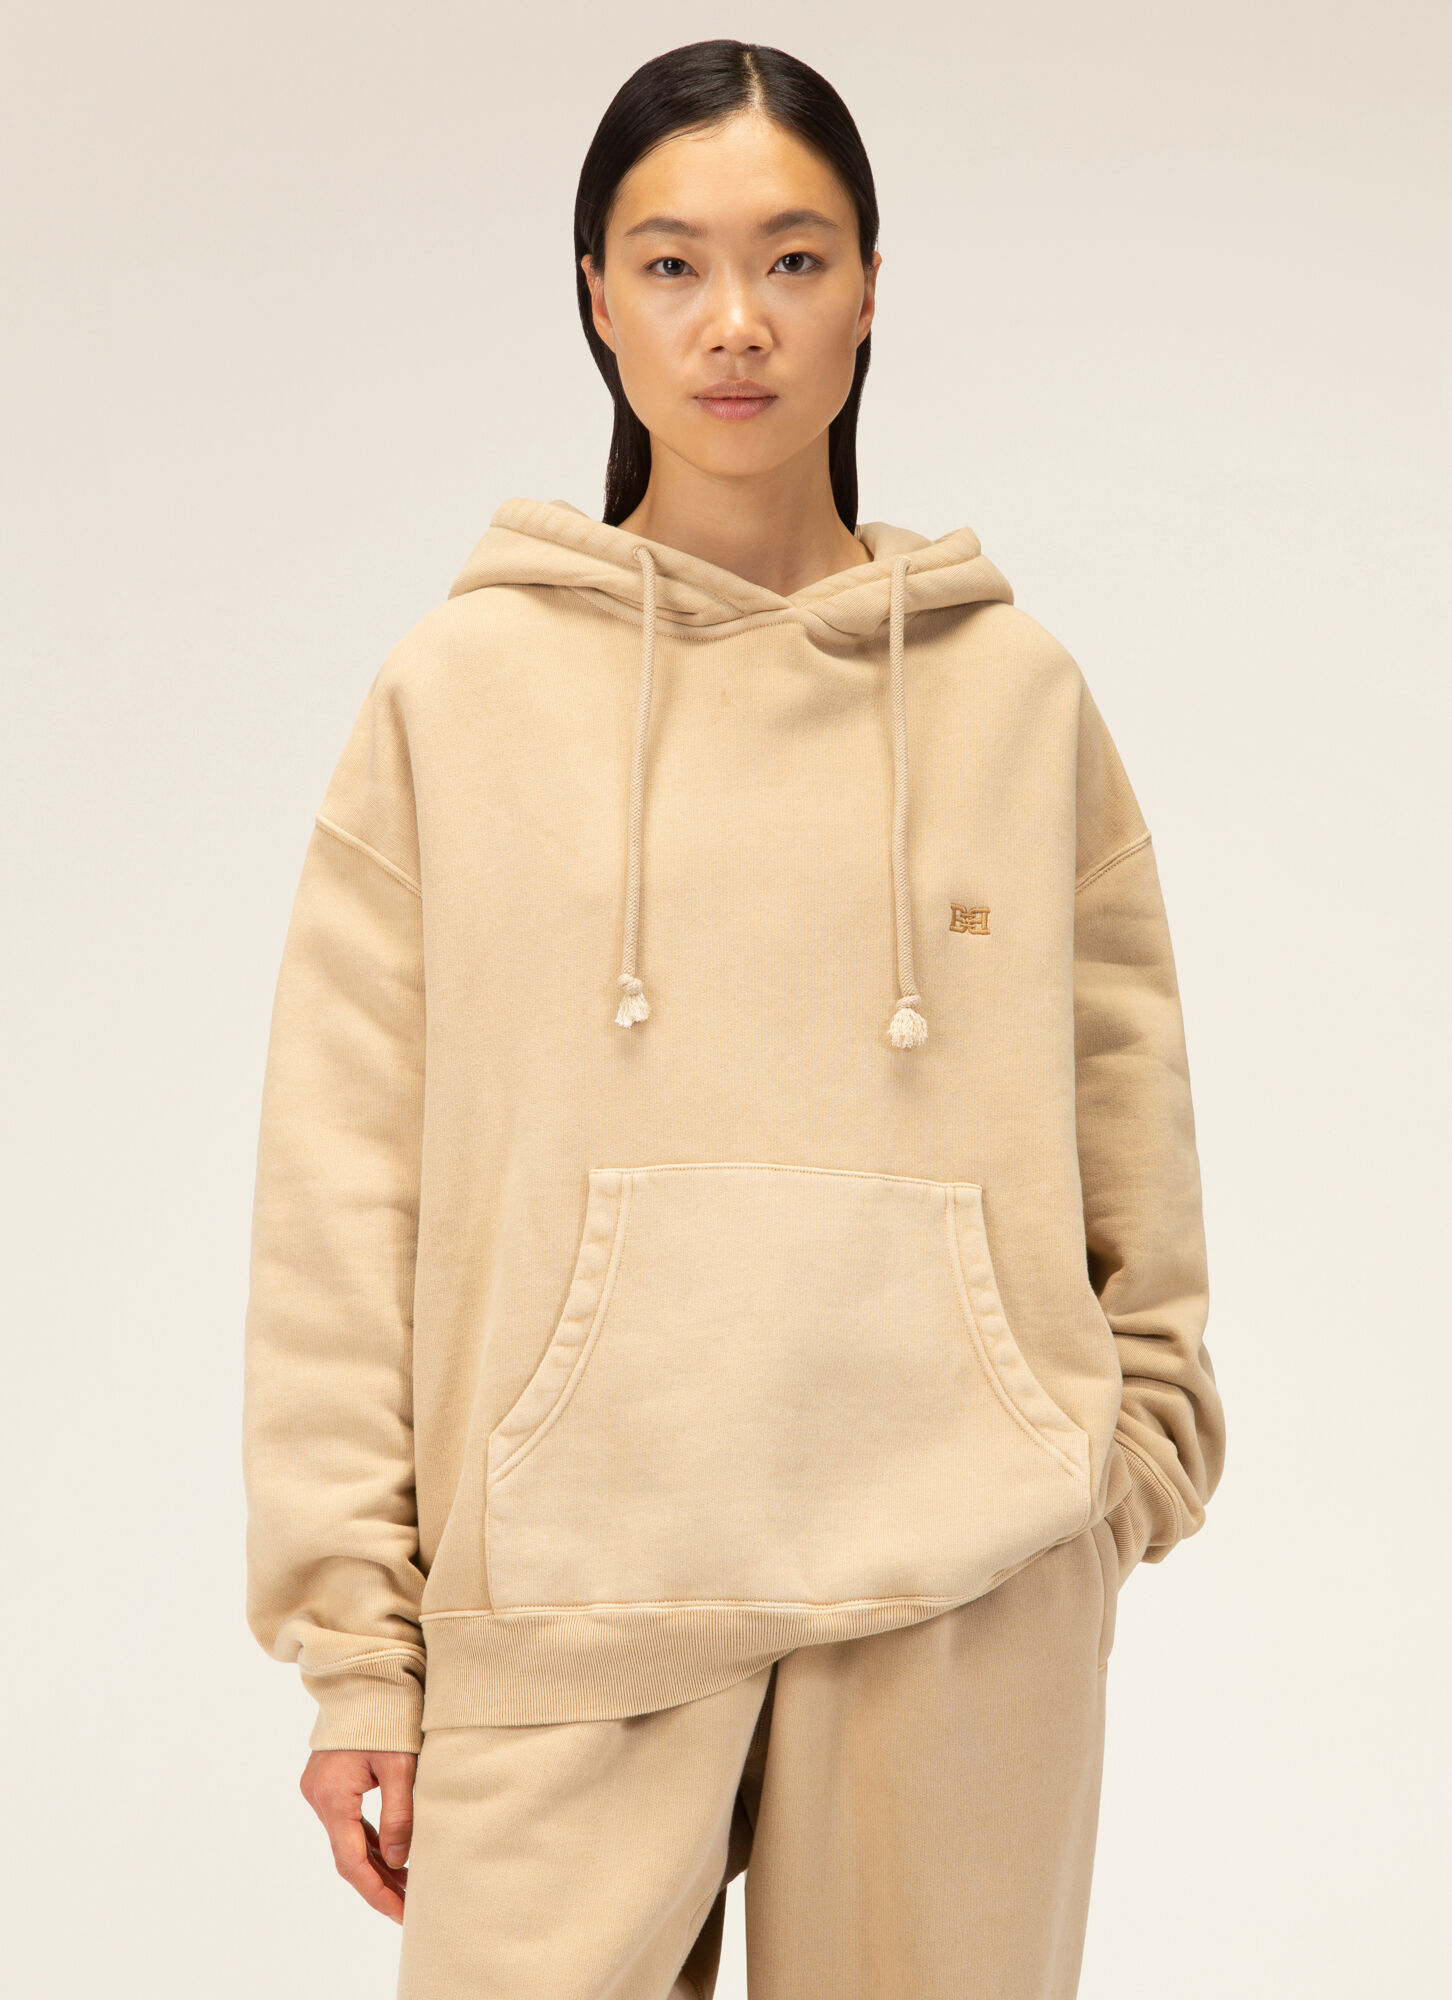 Plant-Dyed Hoodie | Womens Top | Natural-Dye Beige Cotton | Bally